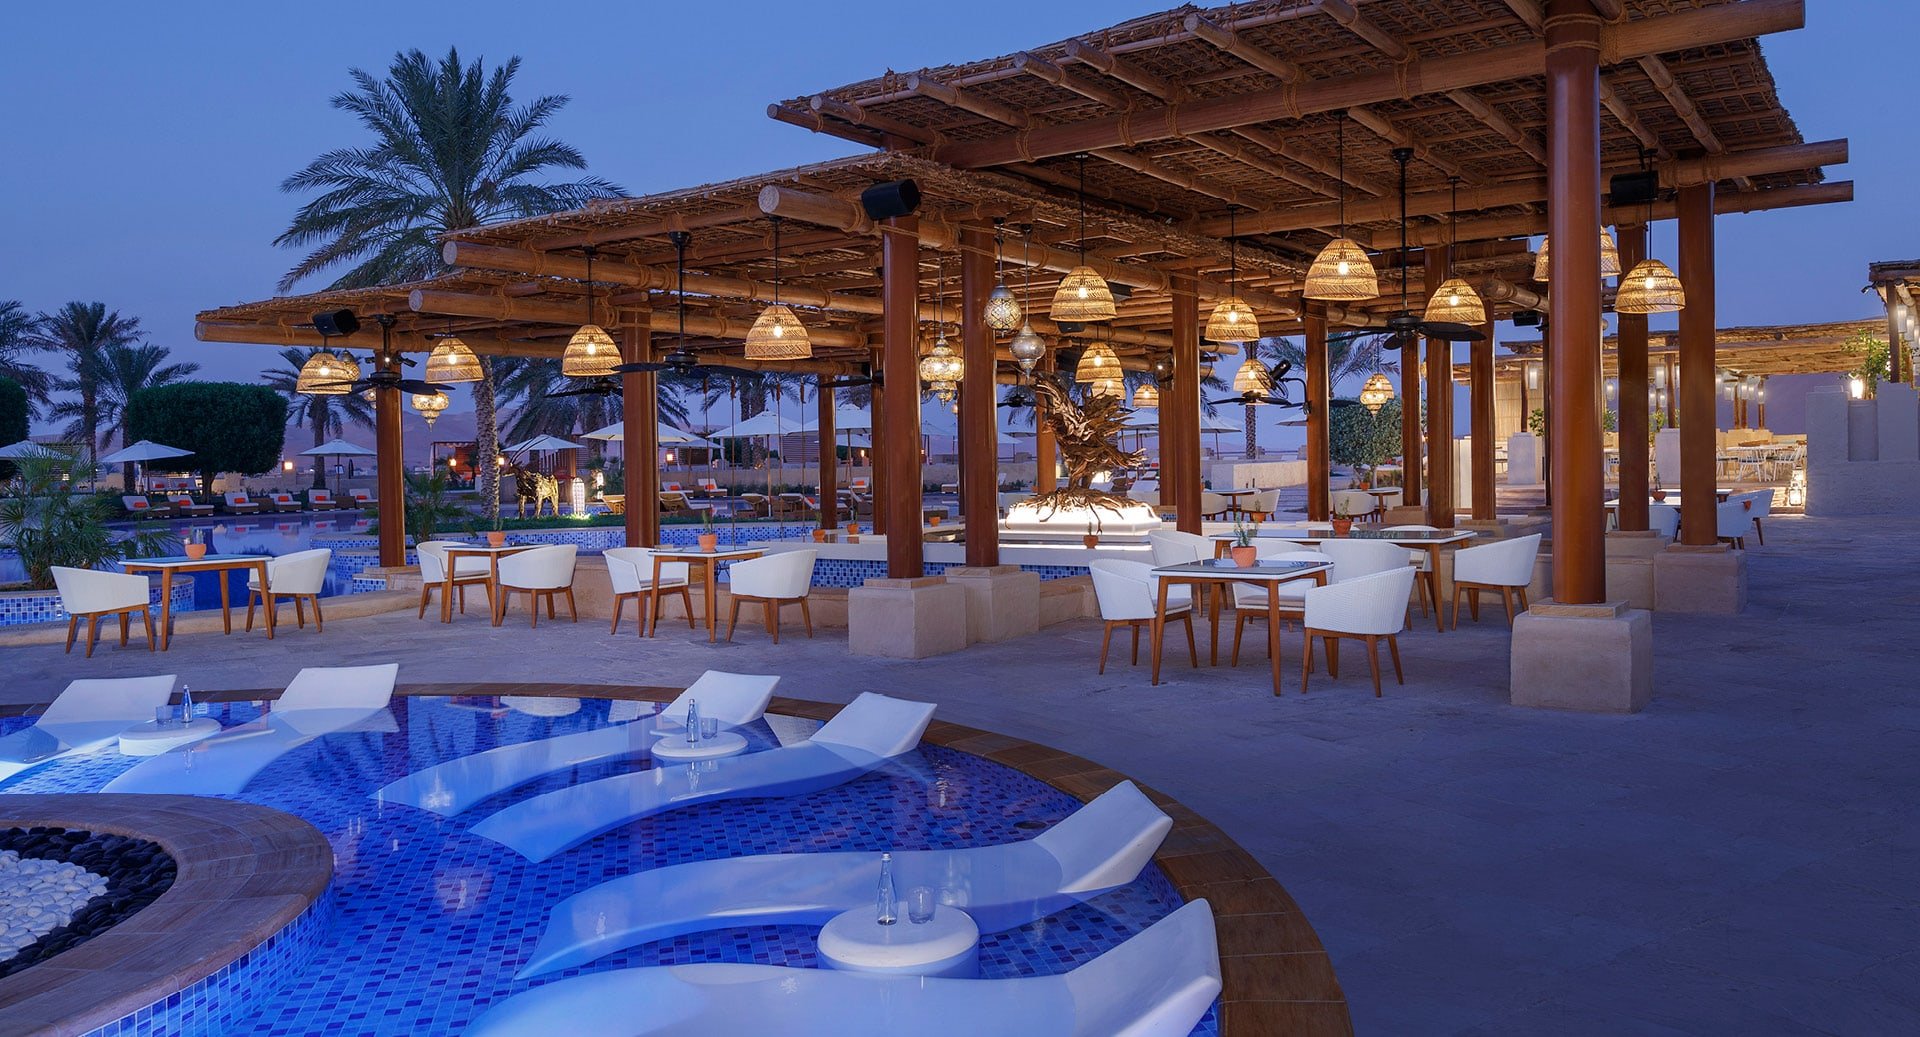 <p><a href="https://www.anantara.com/en/qasr-al-sarab-abu-dhabi/">Qsar Al Sarab is a luxurious resort that offers the ultimate desert experience.</a> Each room is uniquely designed to blend seamlessly with the surrounding desert landscape and provides a range of amenities, such as private pools, outdoor dining areas, and stunning desert views. Guests can enjoy various activities such as dune bashing, camel rides, and falconry shows.</p>